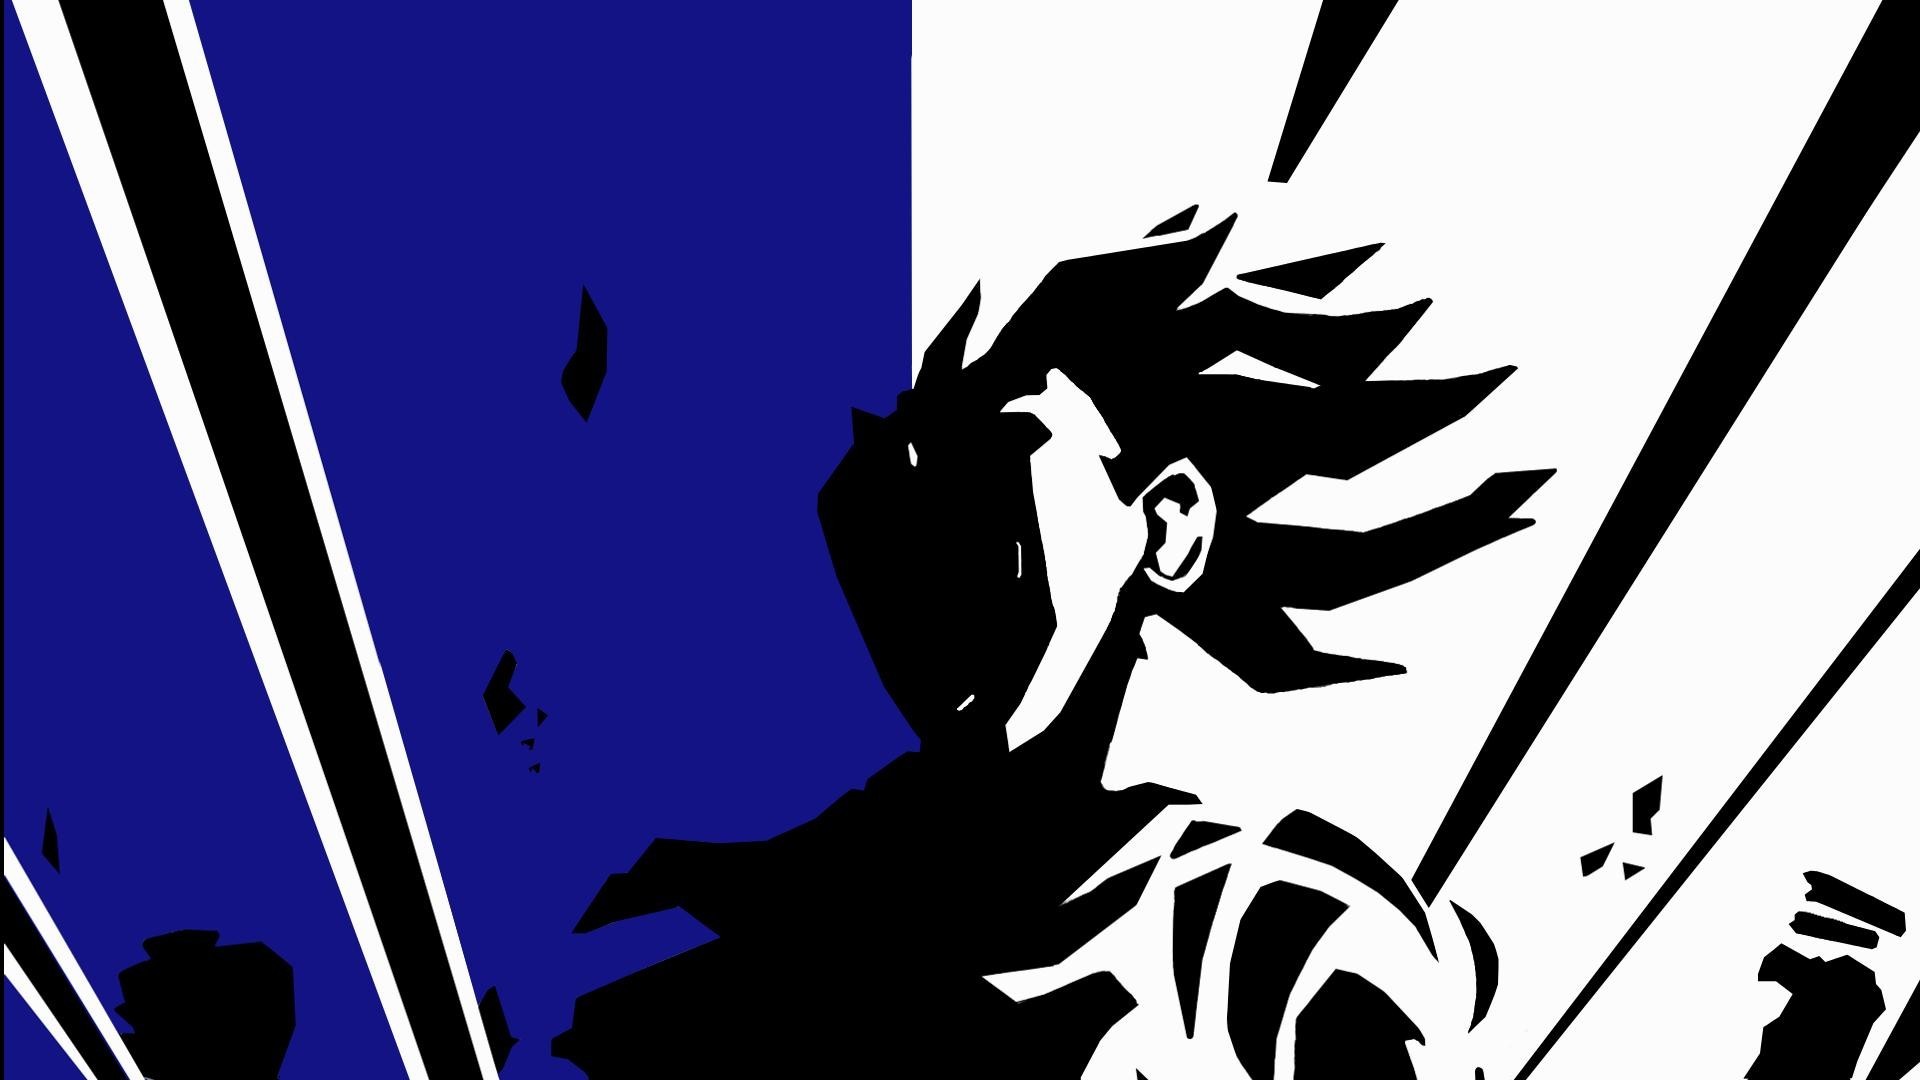 Black Goku HD Backgrounds With Resolution 1920X1080 pixel. You can make this wallpaper for your Desktop Computer Backgrounds, Mac Wallpapers, Android Lock screen or iPhone Screensavers